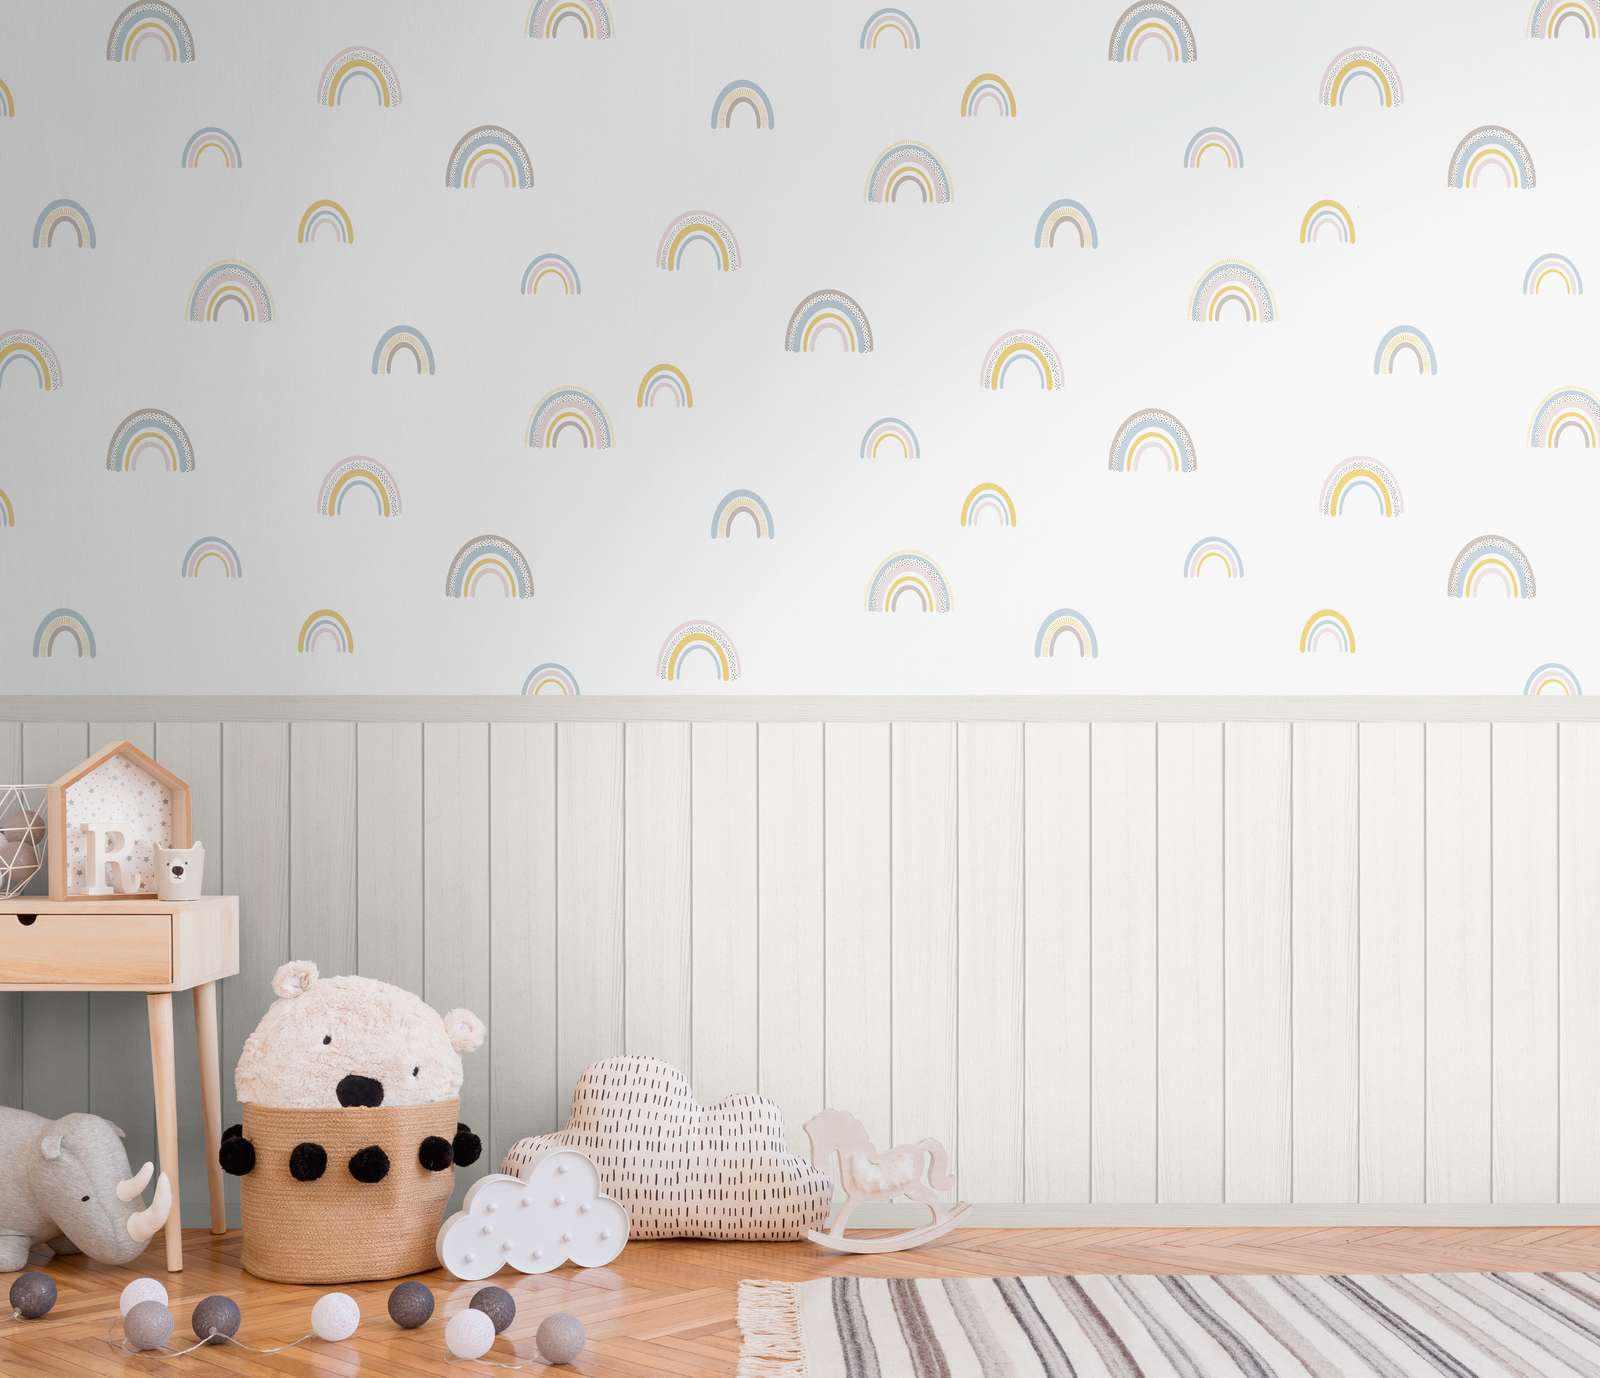             Non-woven motif wallpaper with wood-effect plinth border and rainbow pattern - white, grey, colourful
        